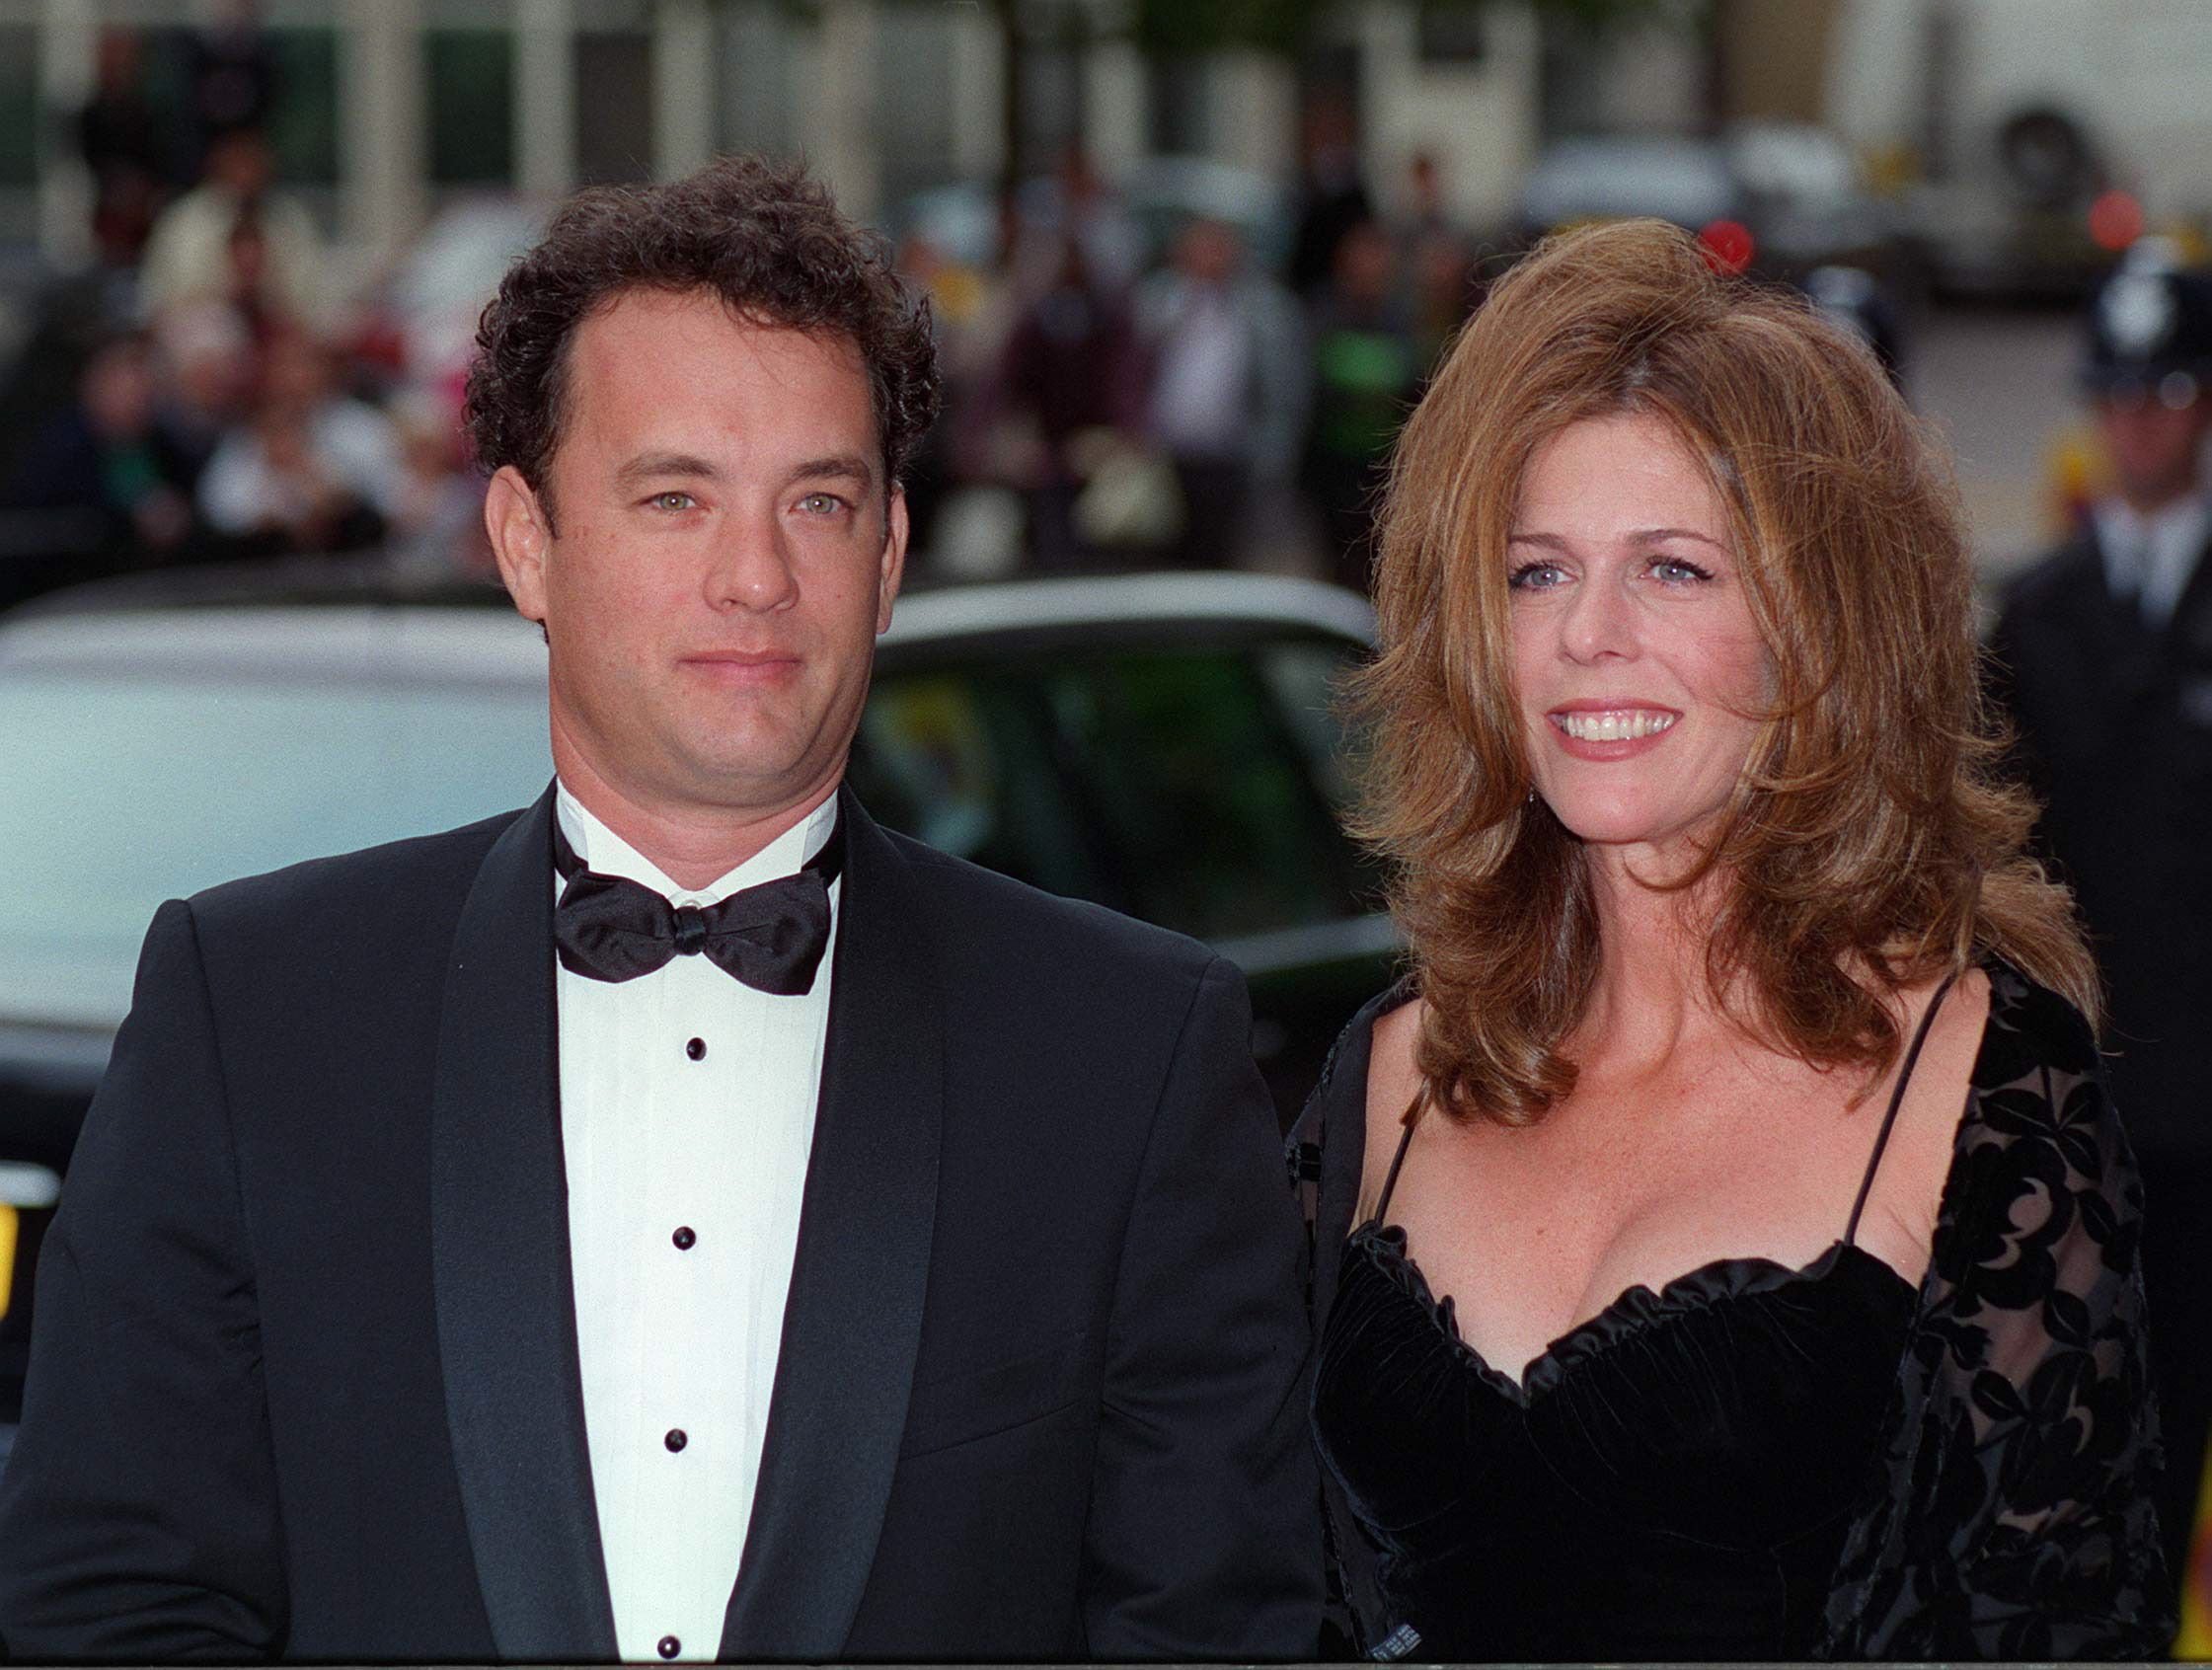 Tom Hanks and his wife, Rita Wilson, at the film preview of "Apollo 13" in London on September 7, 1995 | Photo: Tim Graham/Getty Images